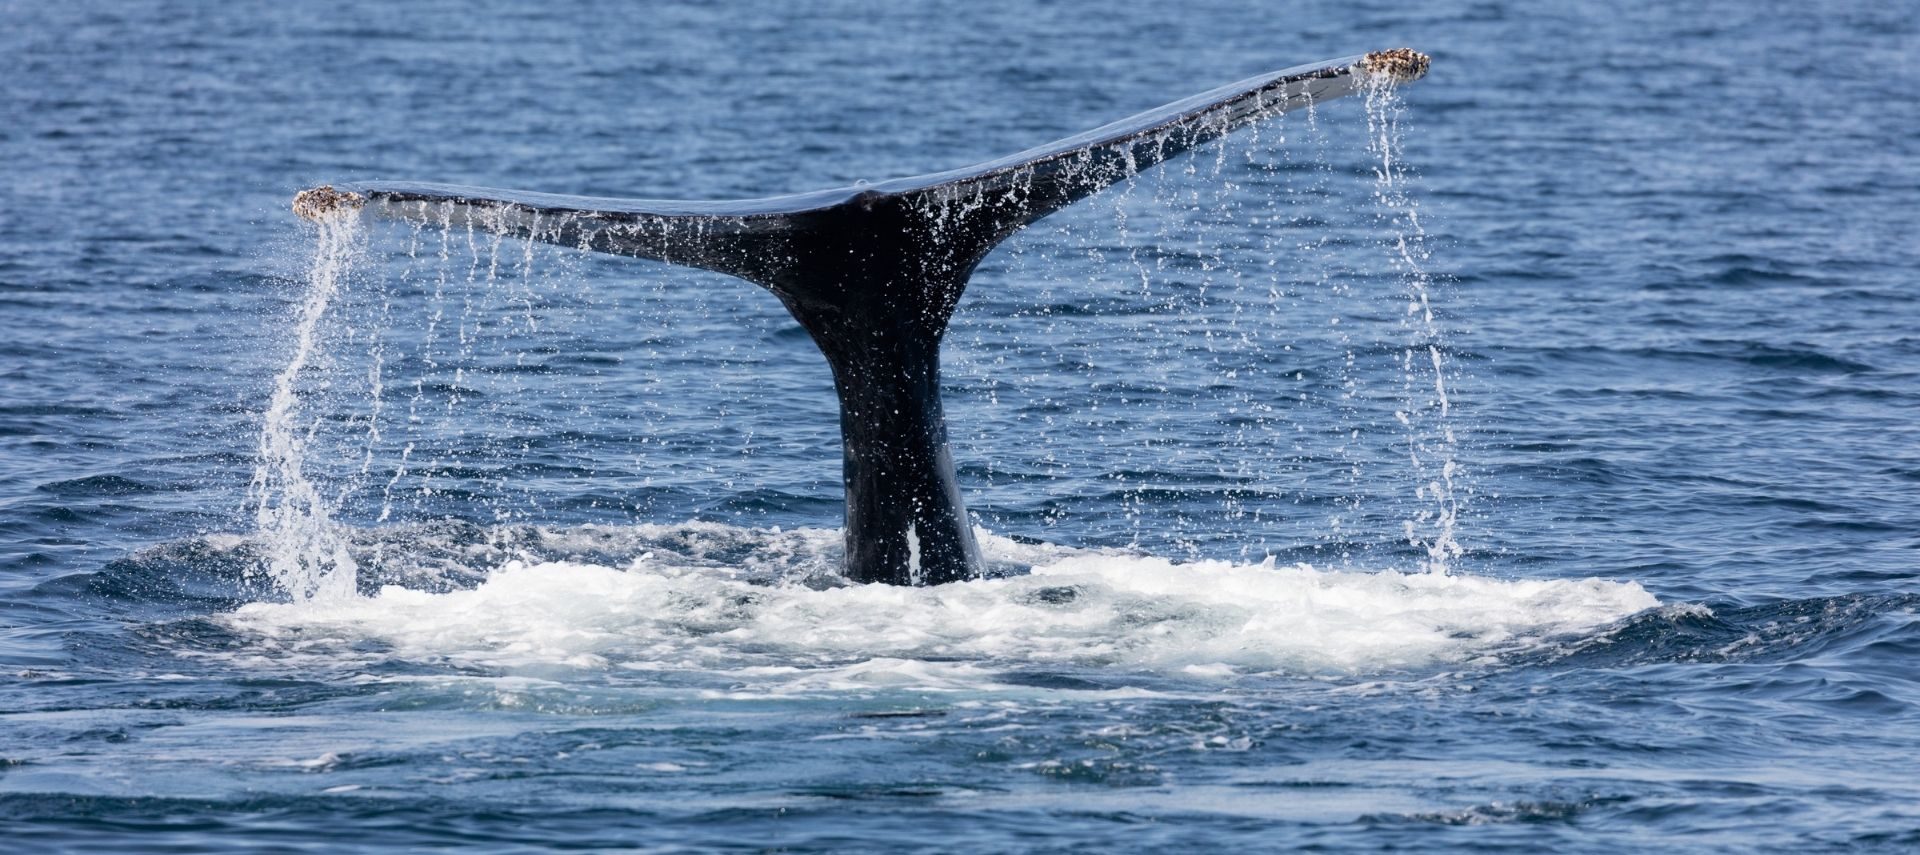 Whale tale sticking out of the ocean on Cape Cod